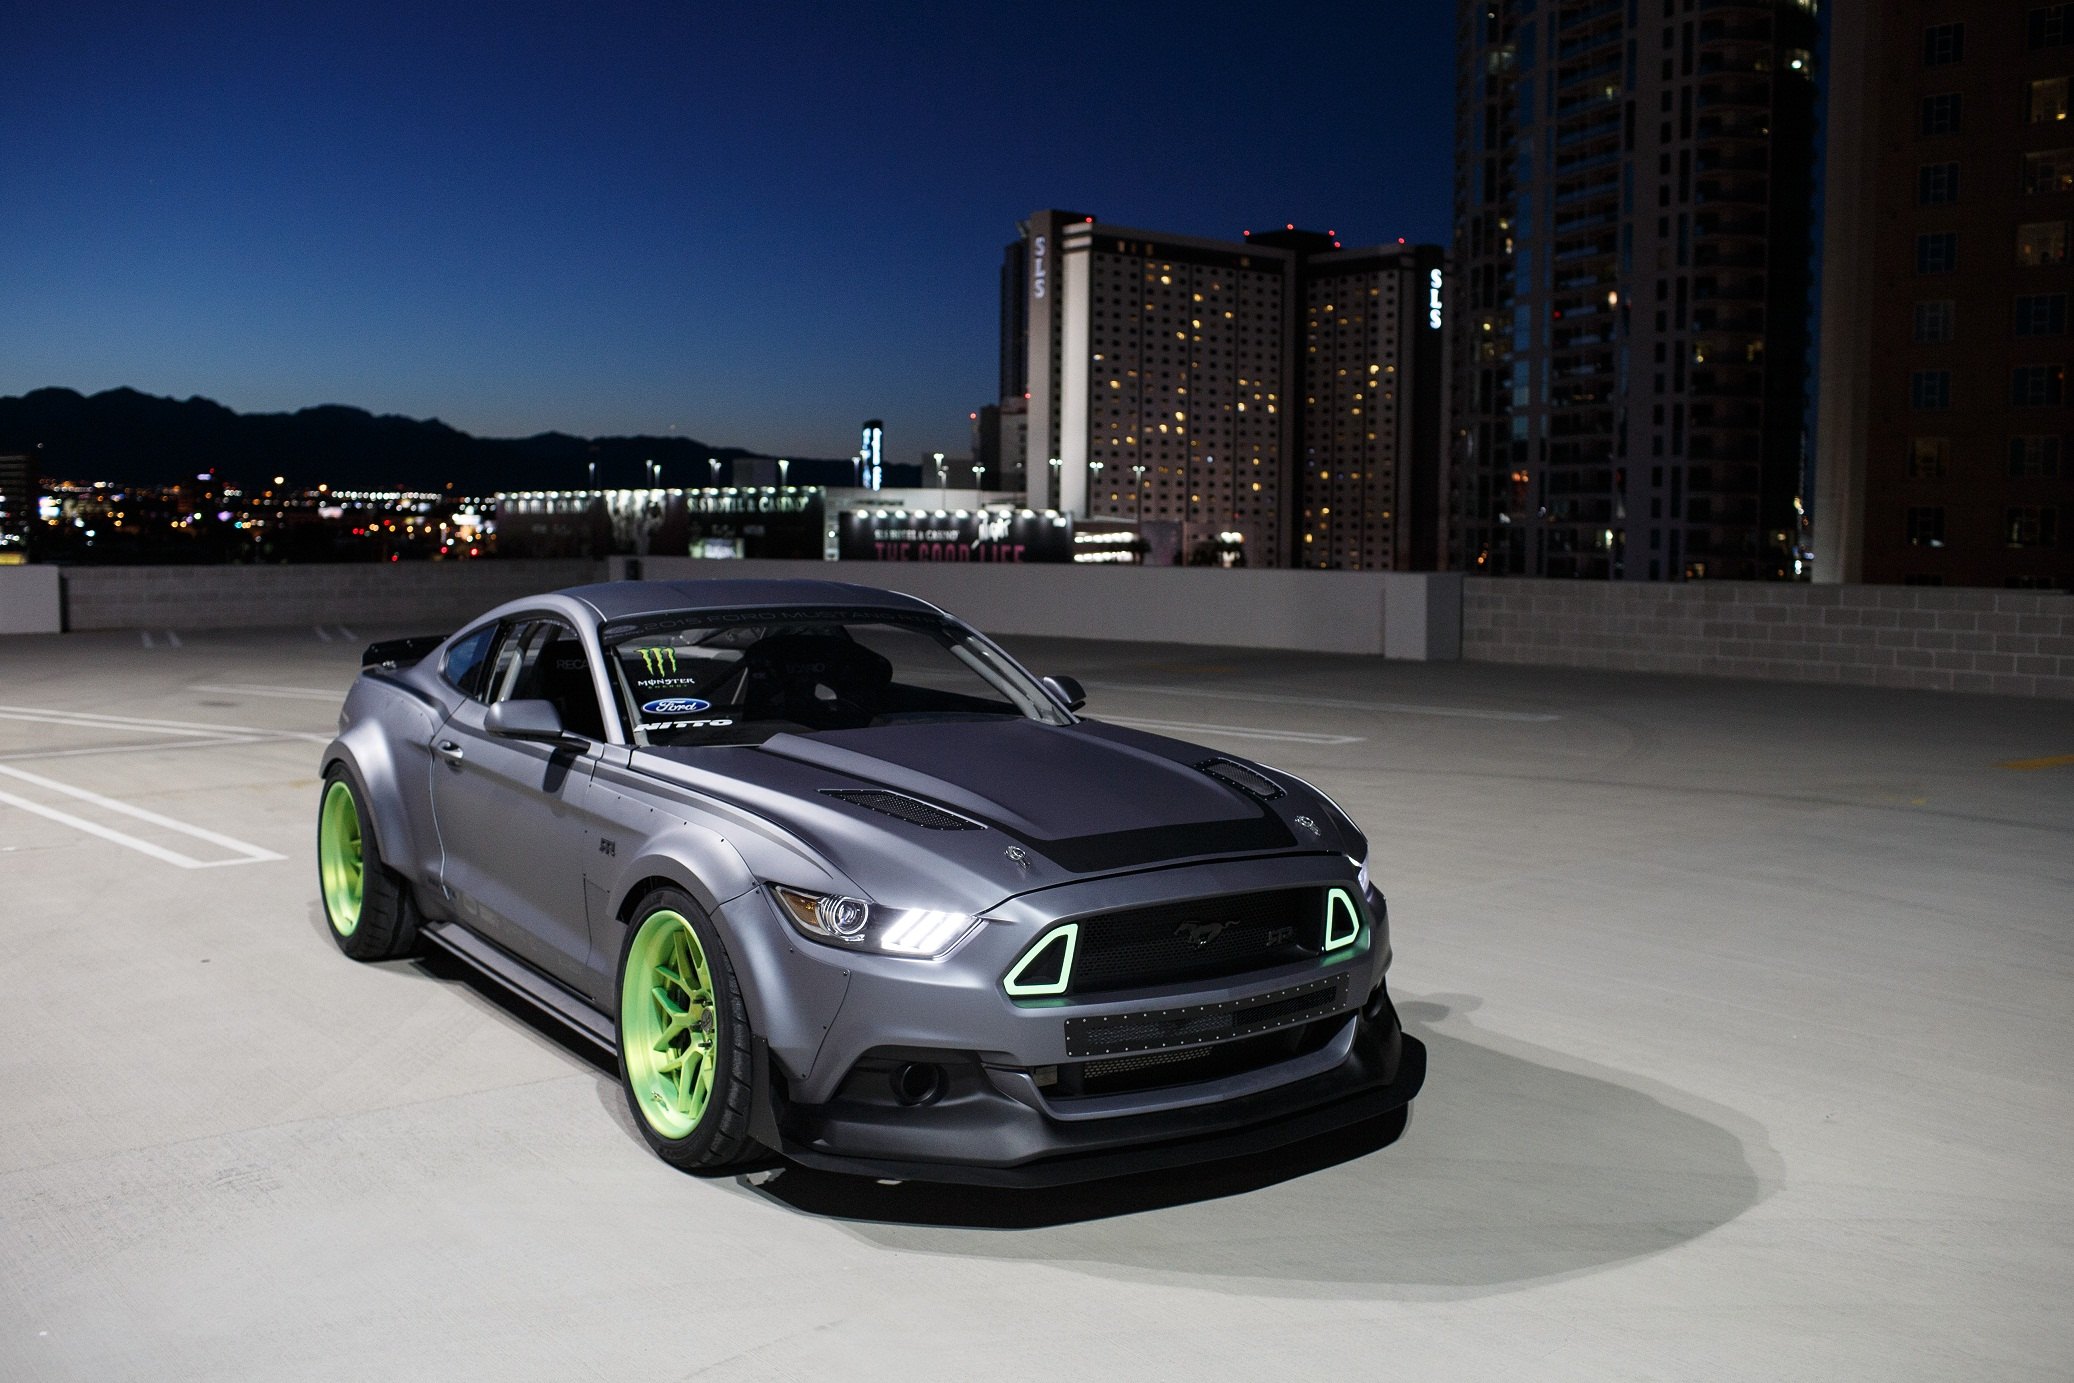 Drift Spec RTR Ford Mustang GT with Overfenders - Photo by Ford Mustang RTR